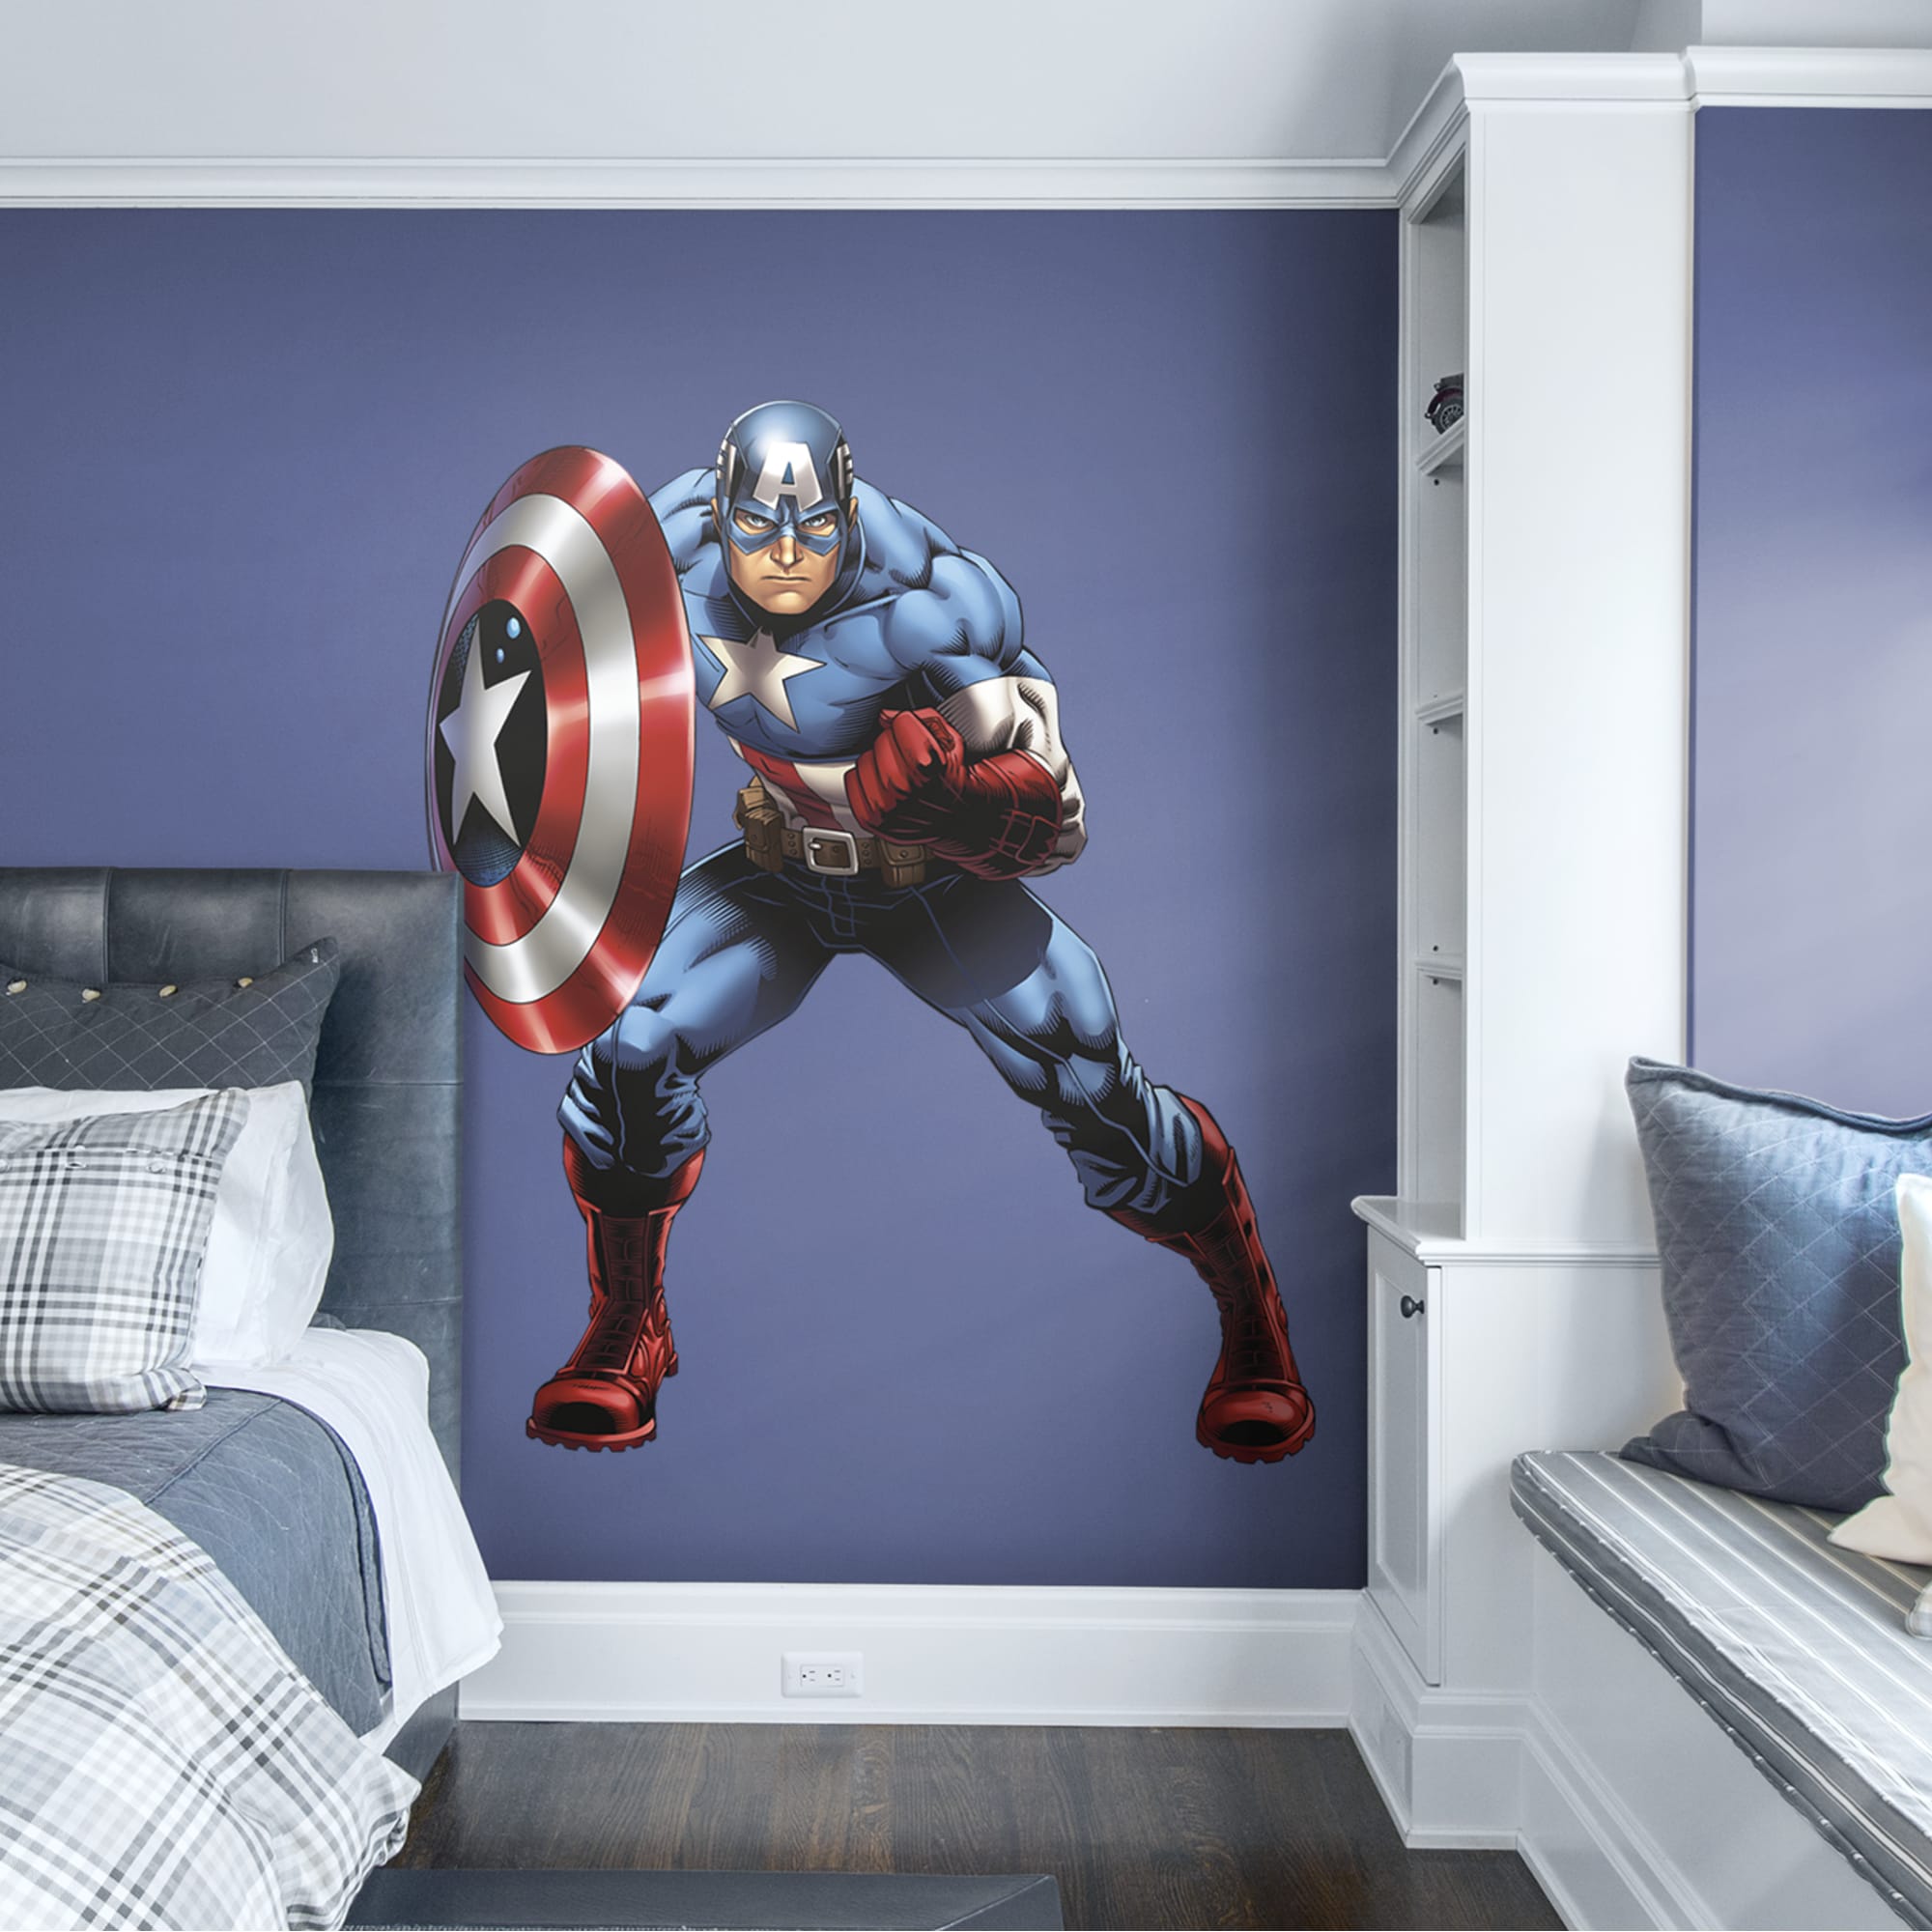 Captain America: Marvels Avengers Assemble - Officially Licensed Removable Wall Decal 58.0"W x 68.0"H by Fathead | Vinyl